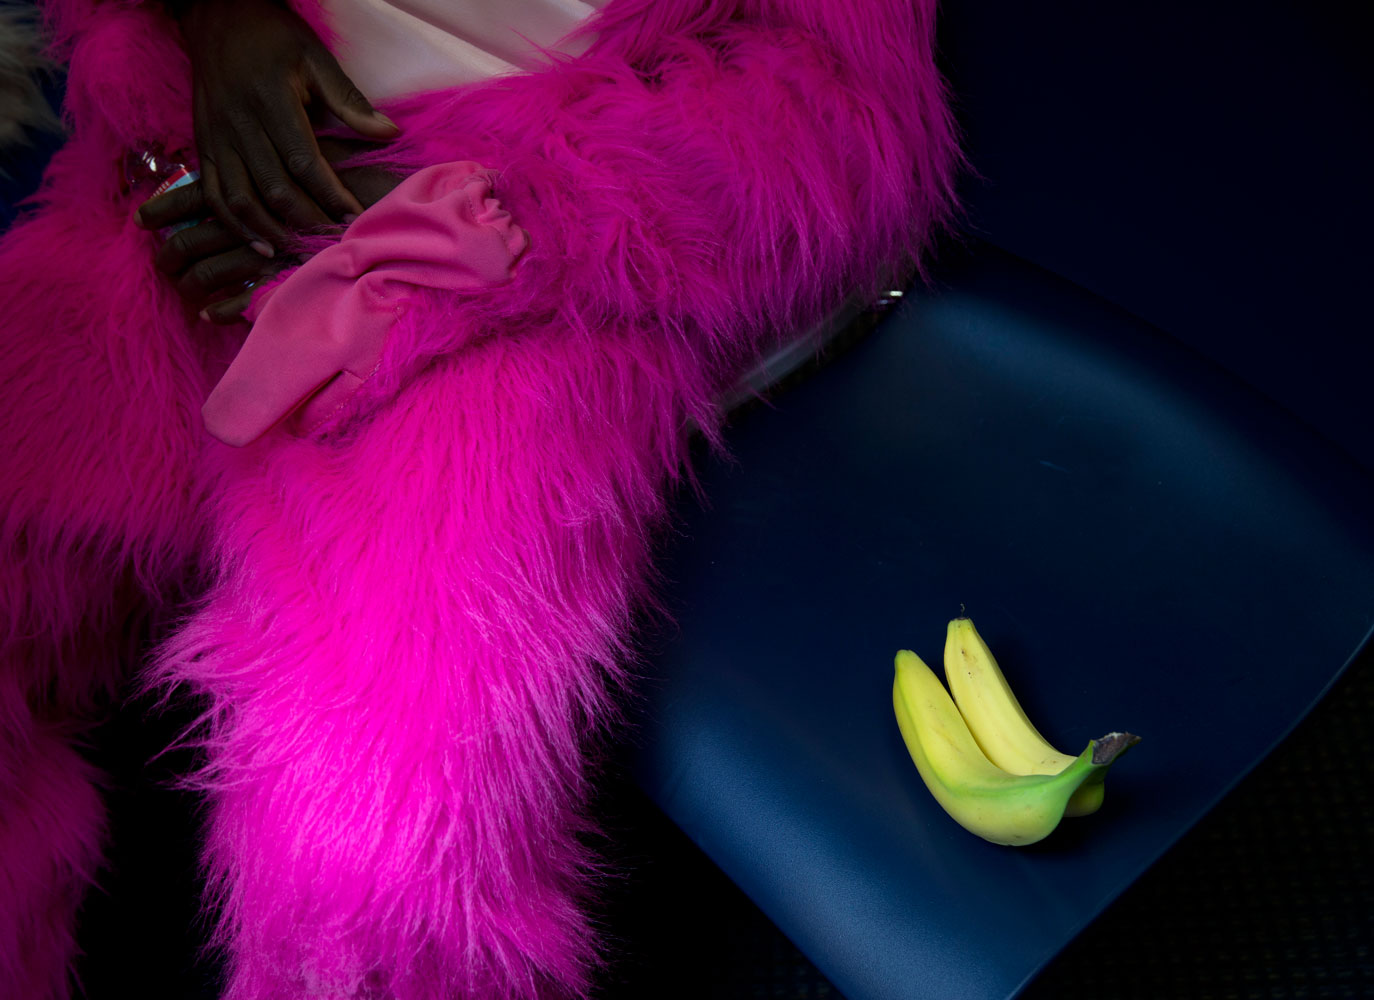 Miley Cyrus, "The Bangerz Tour"  at the Verizon Center in Washington DC.  Shown here prior to the concert, backstage in the dinning room joined by her  cast of furry friends and cartoon characters.